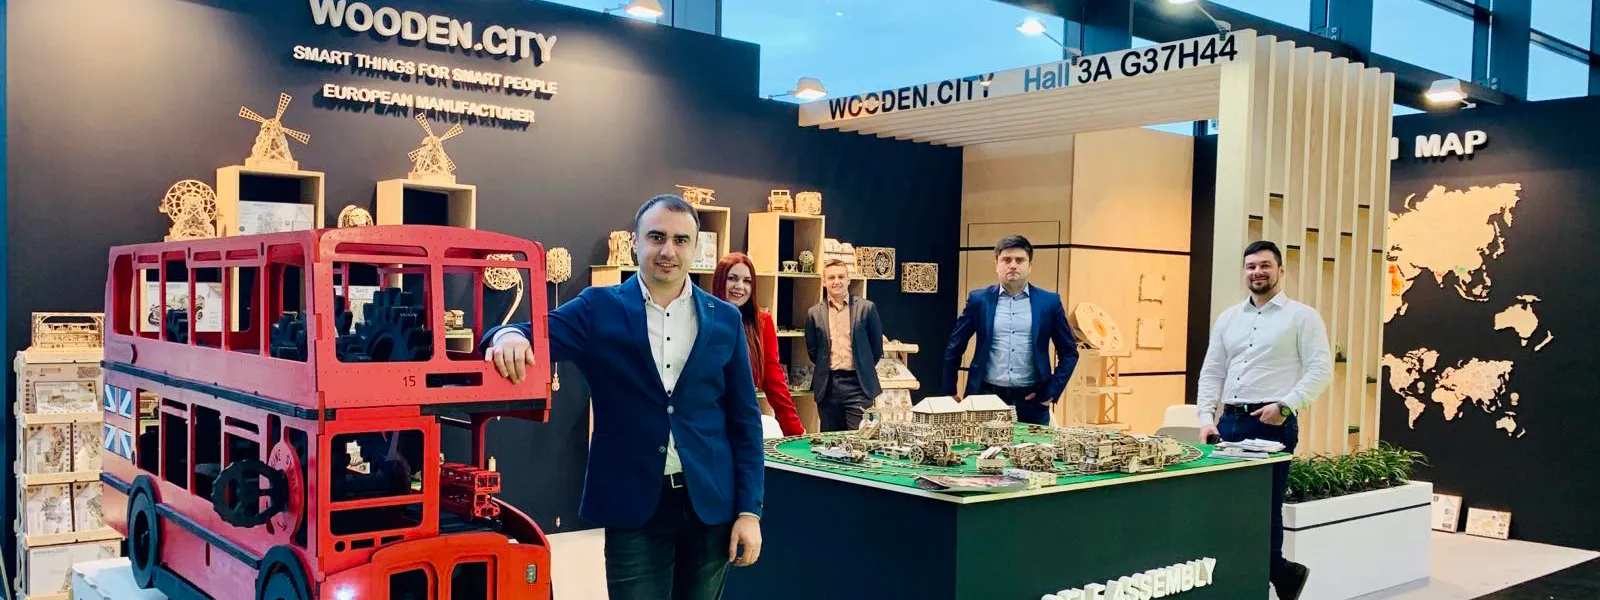 About Wooden City